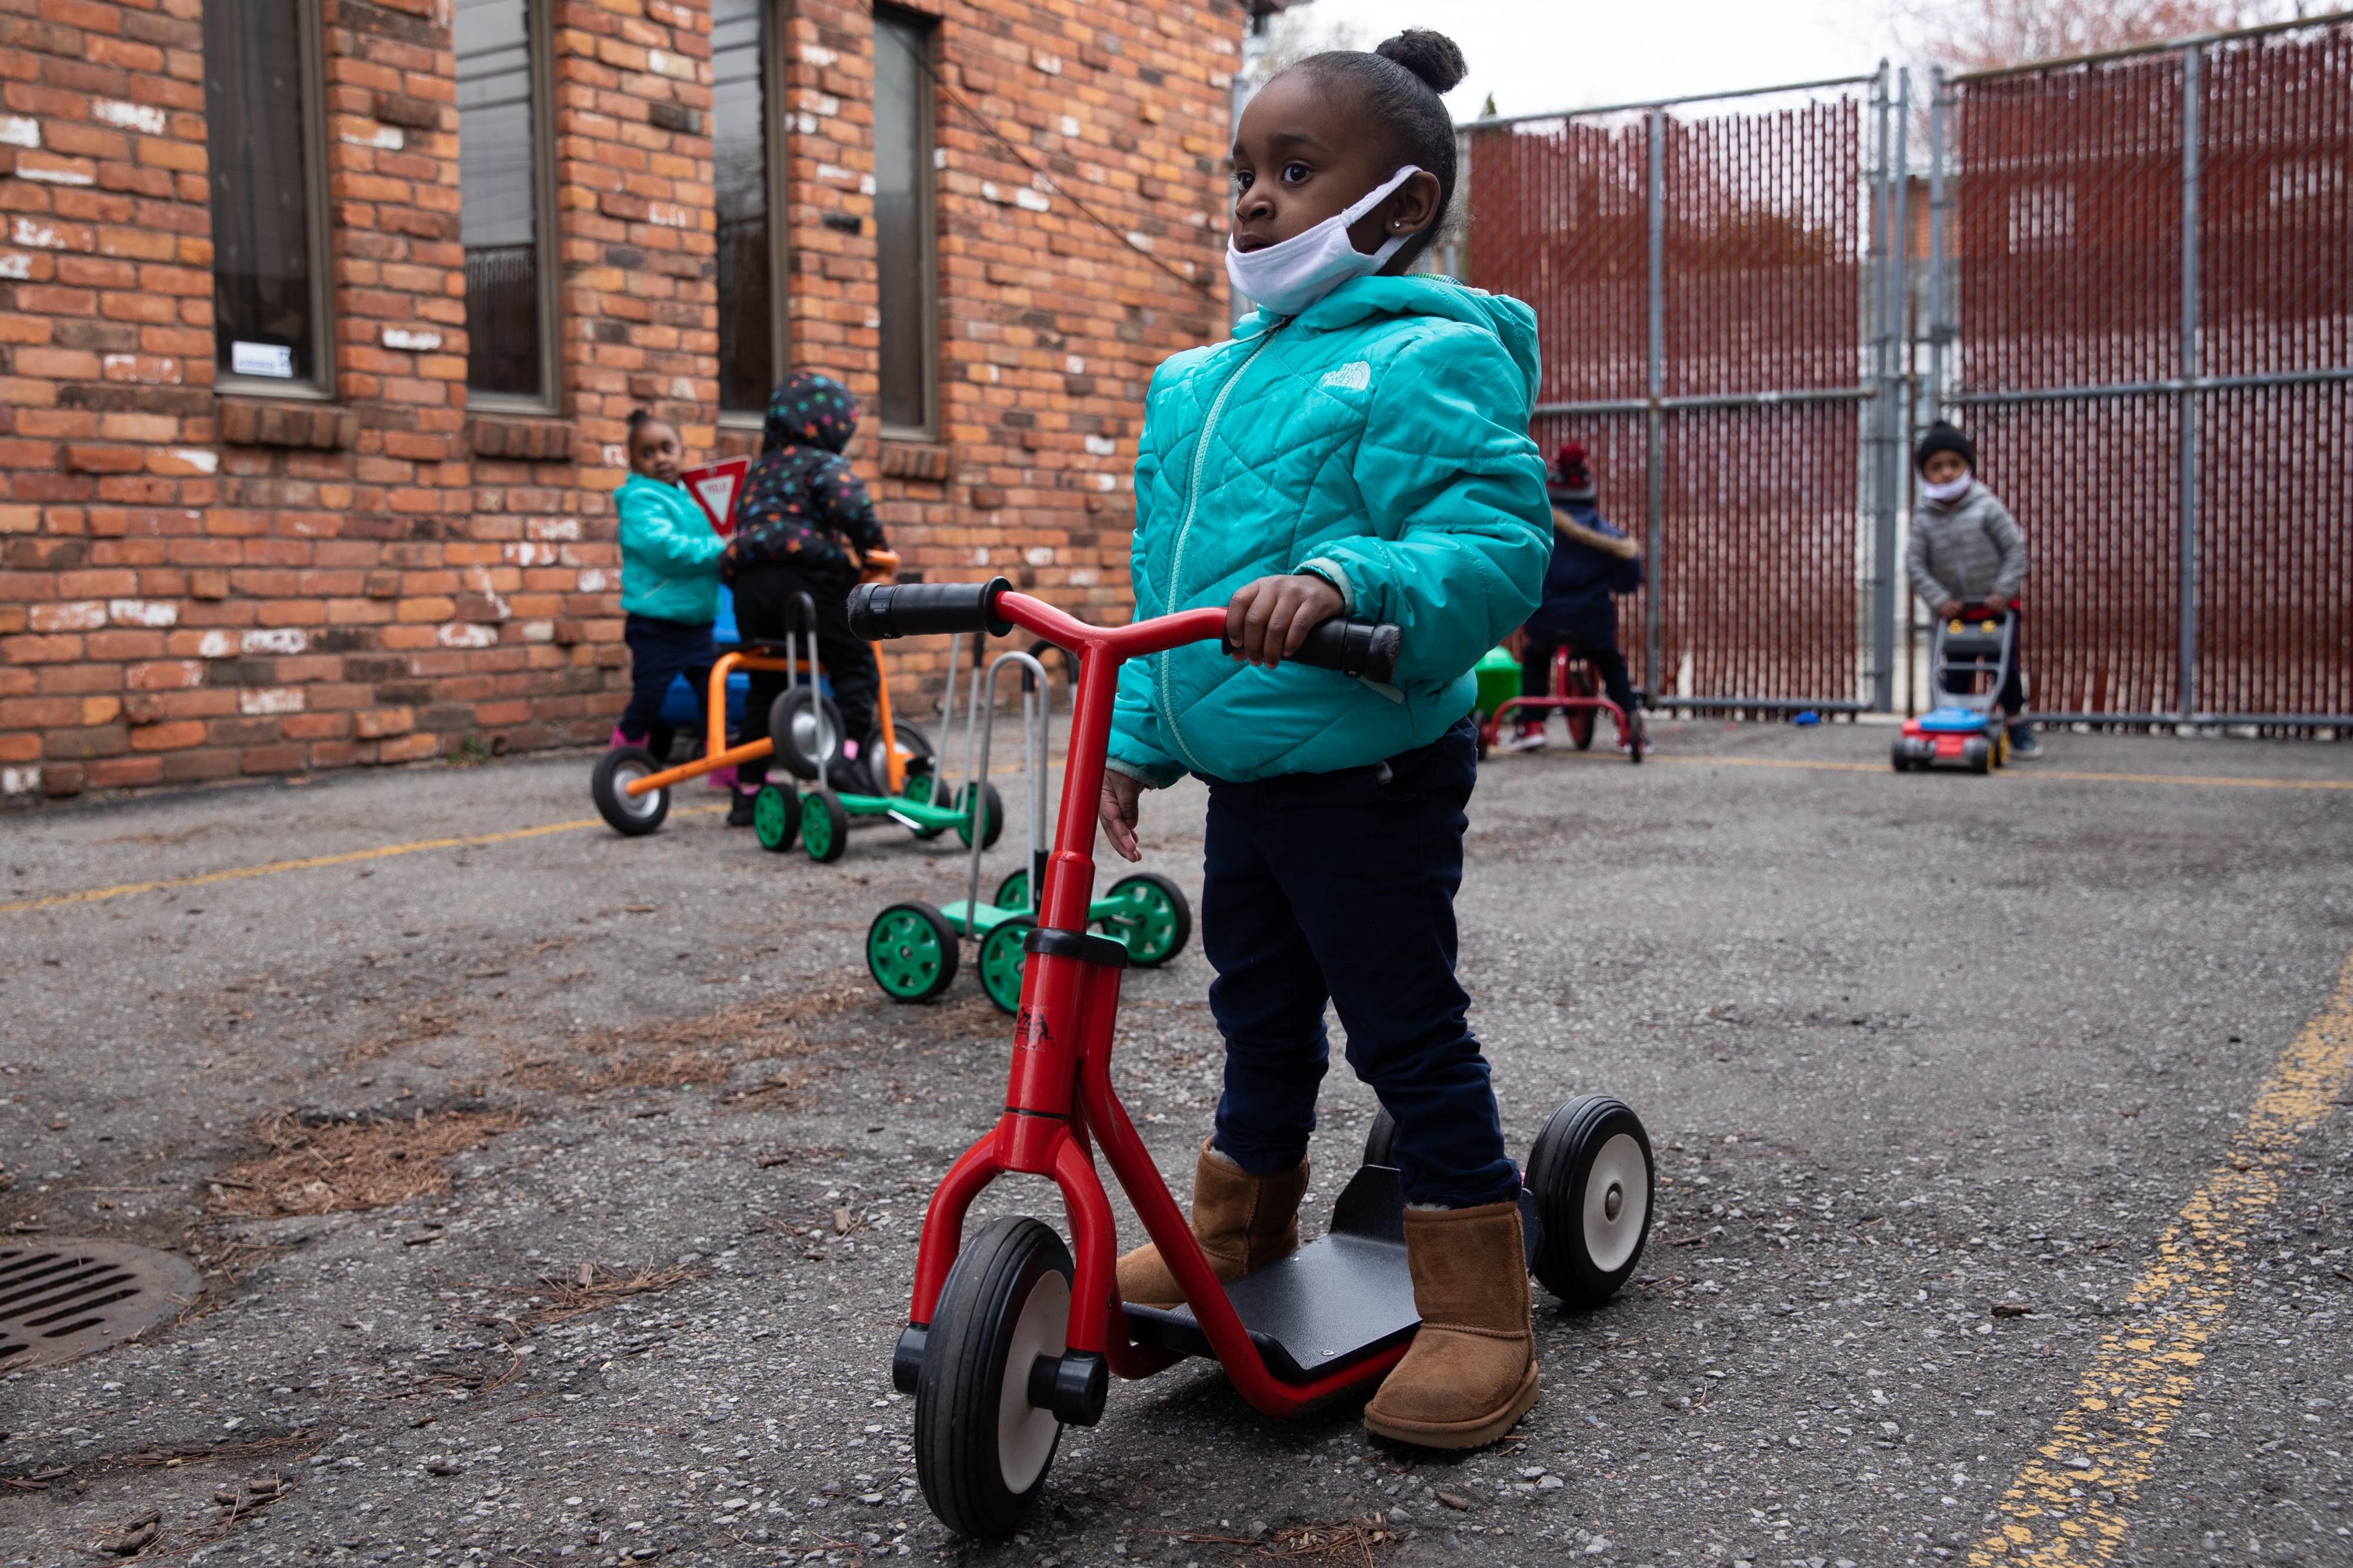 Payton Watson (front) rides around on a scooter as the preschoolers play outside at Little Scholars child care center in Detroit, Michigan, U.S., on Thursday April 1, 2021.